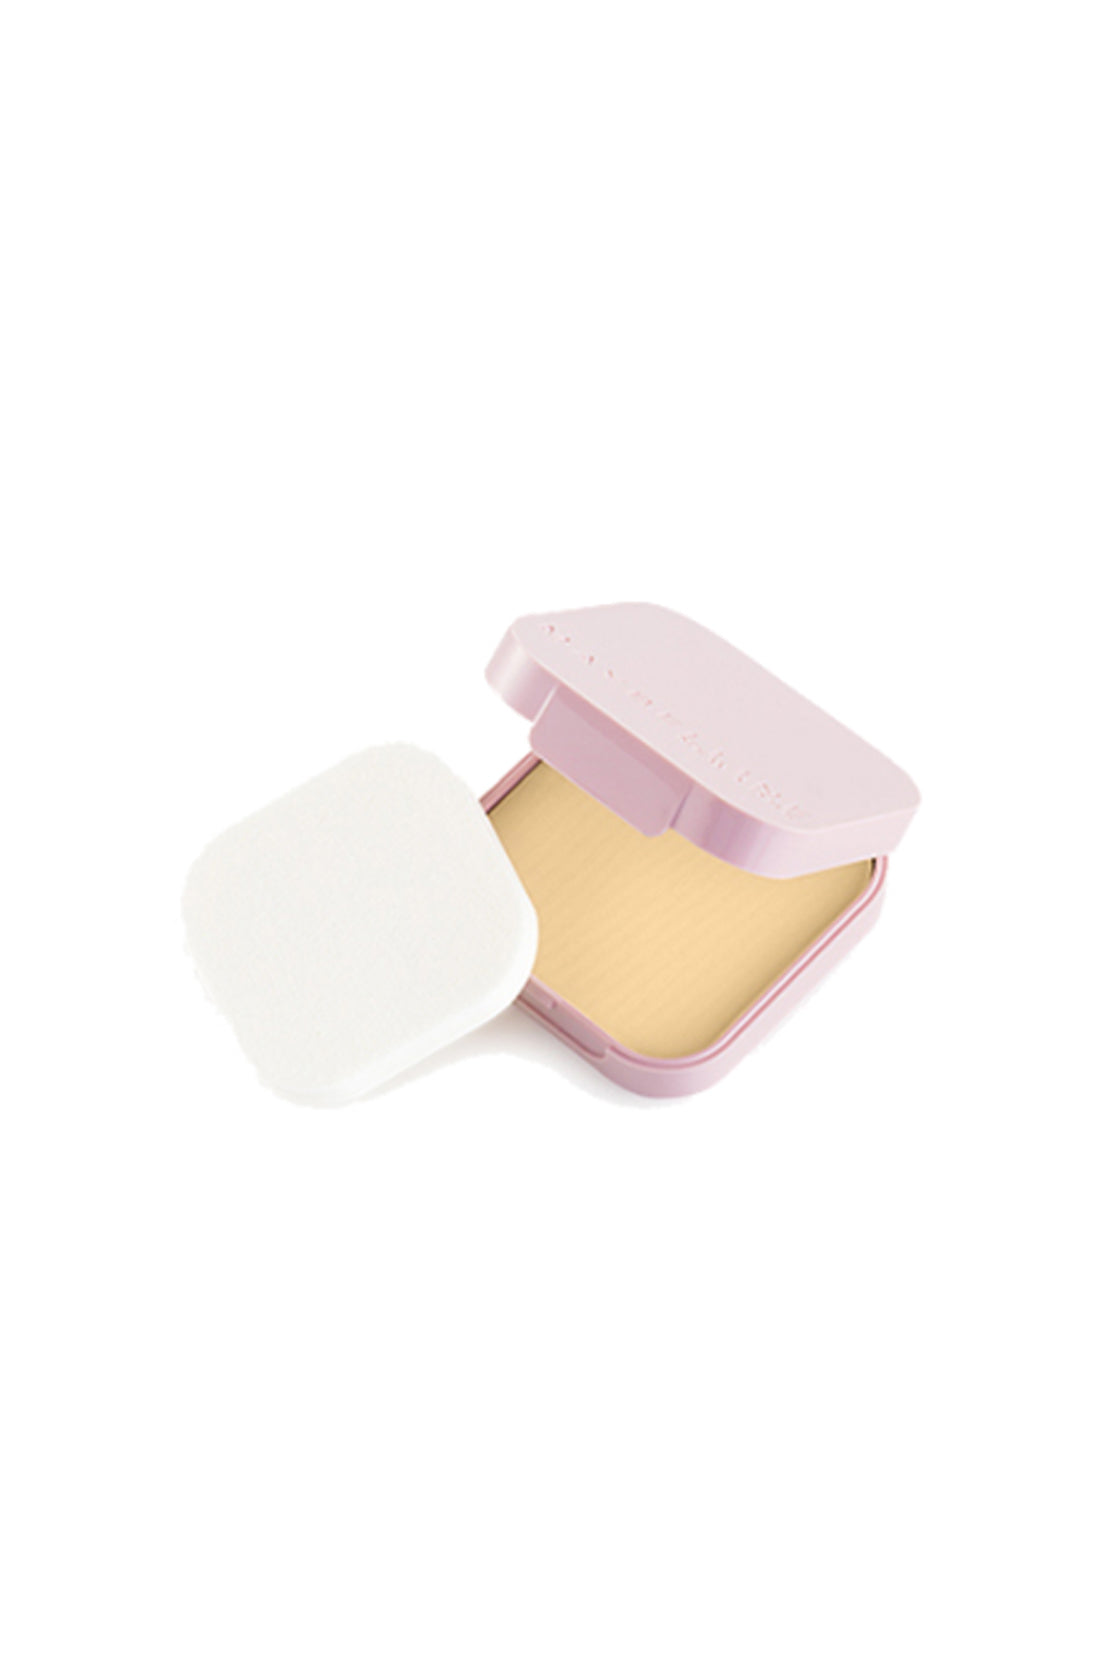 Clear Smooth All In One Powder Foundation - 03 Natural RIOS